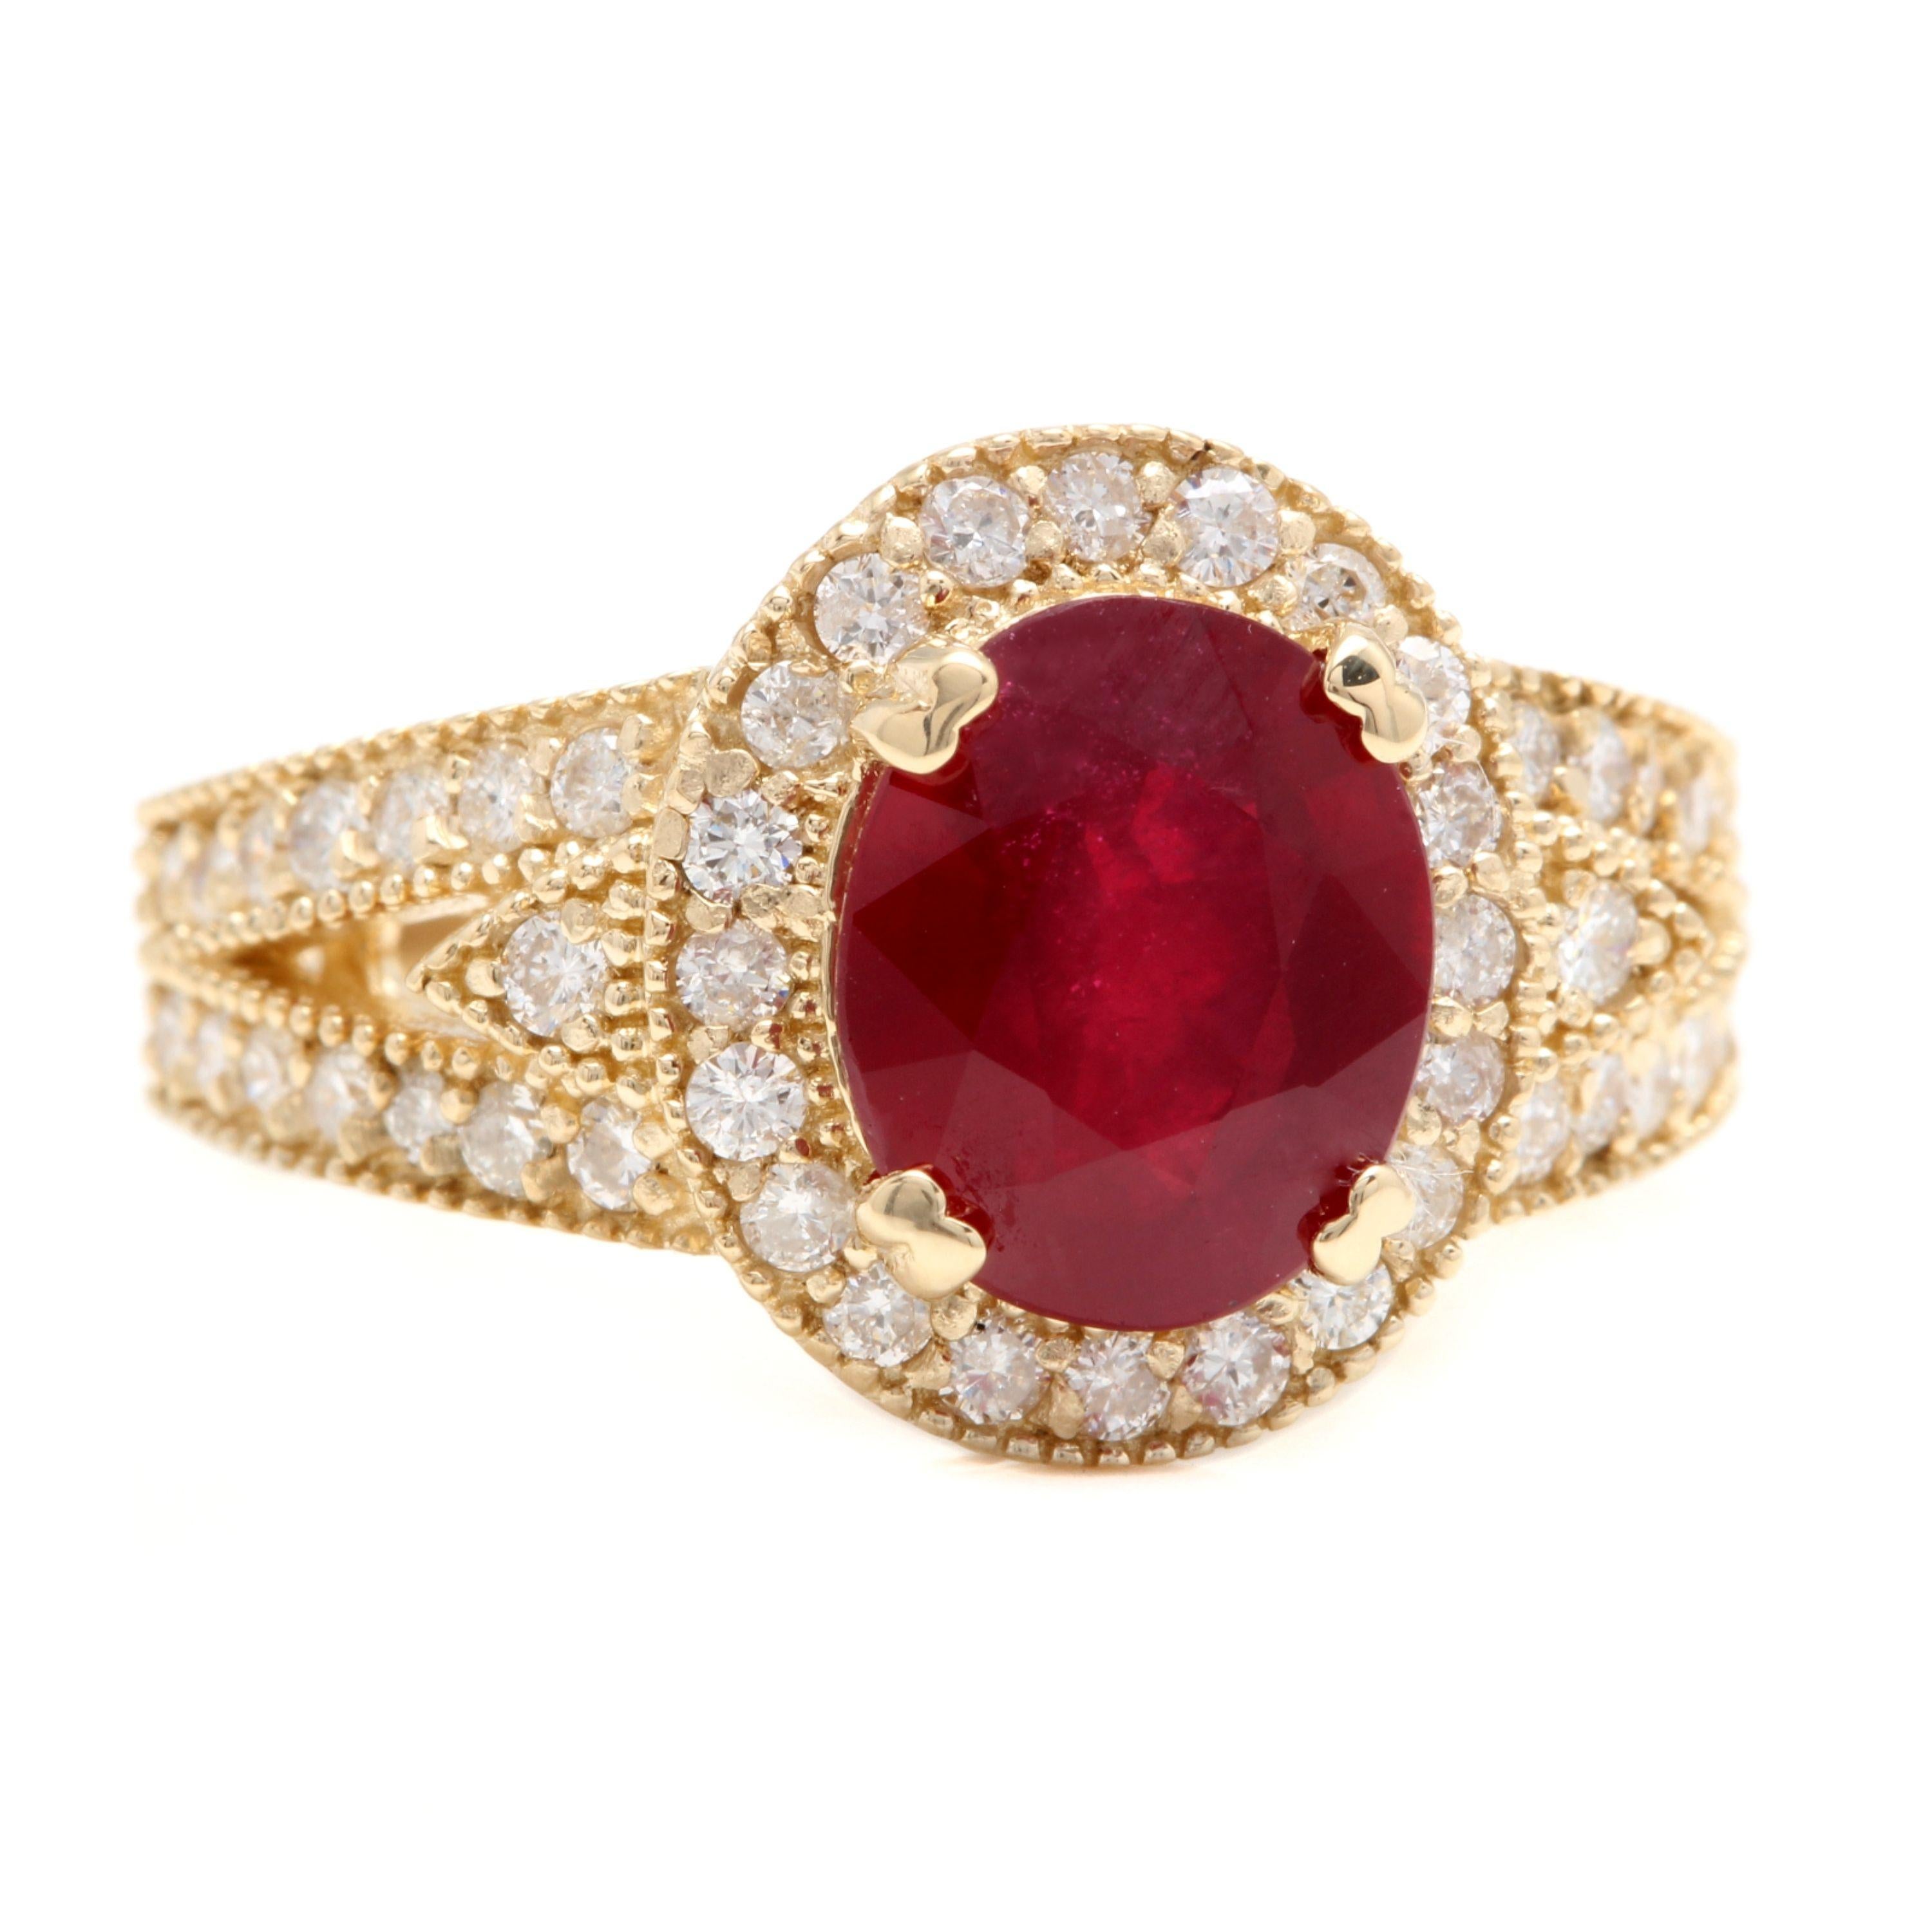 7.15 Carats Impressive Red Ruby and Natural Diamond 14K Yellow Gold Ring

Total Red Ruby Weight is Approx. 6.00 Carats

Ruby Treatment: Lead Glass Filling

Ruby Measures: Approx. 11.00 x 9.00mm

Natural Round Diamonds Weight: Approx. 1.15 Carats